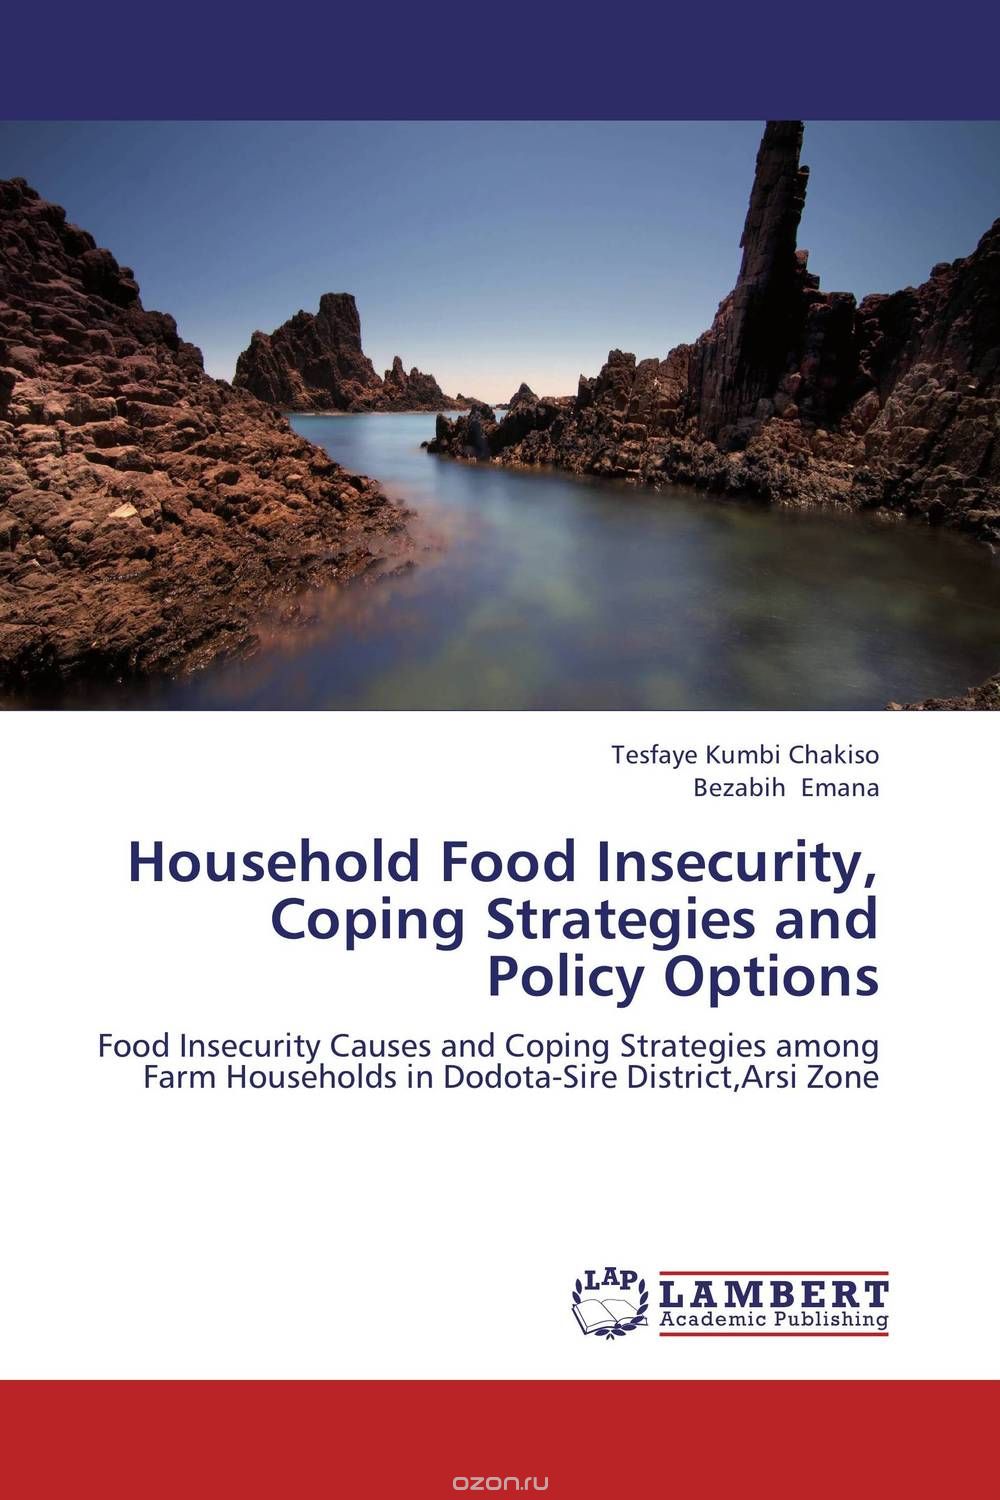 Скачать книгу "Household Food Insecurity, Coping Strategies and Policy Options"